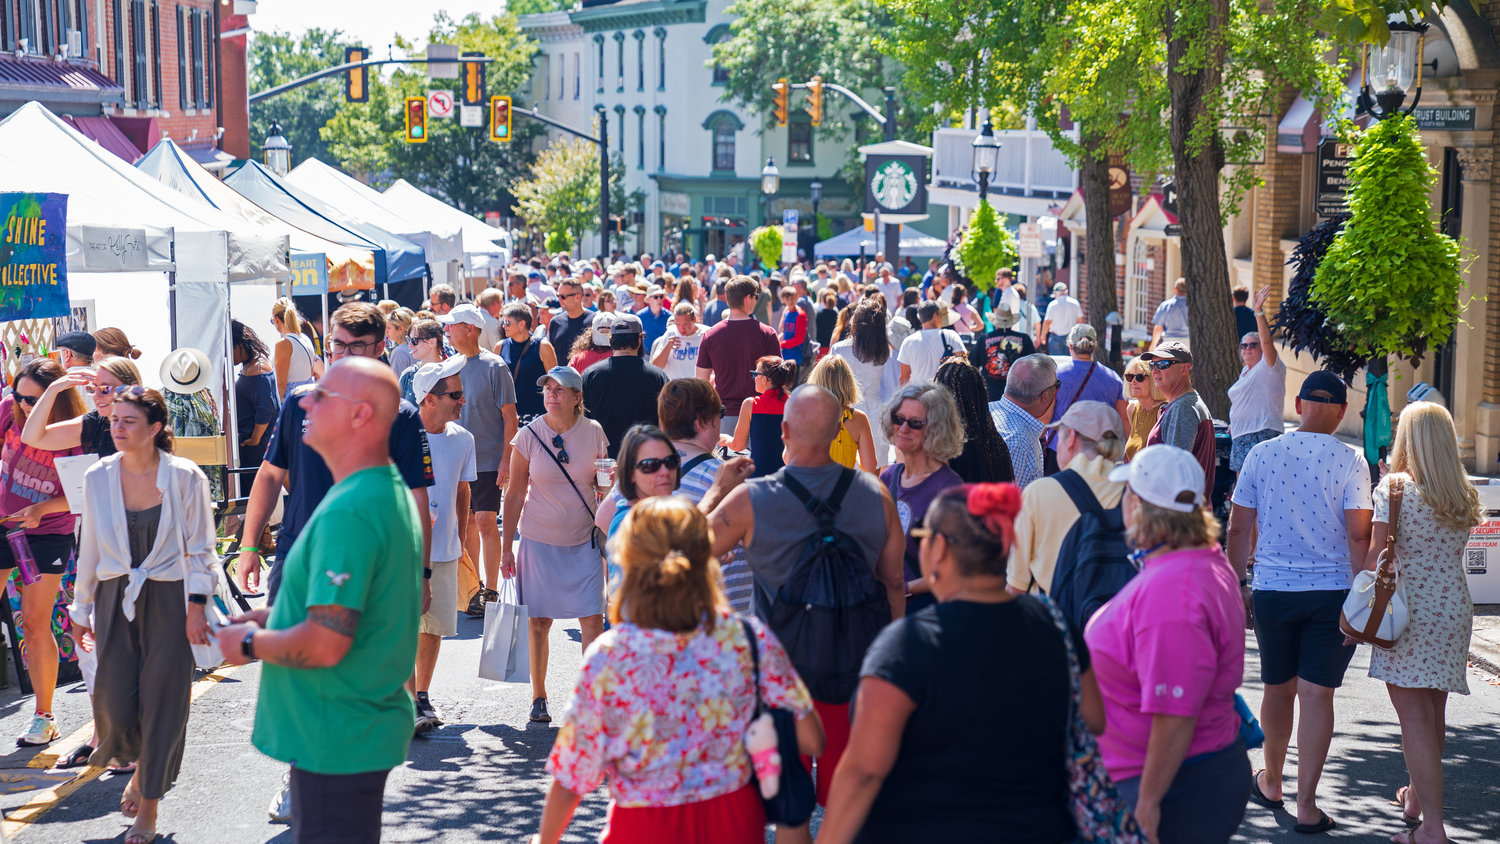 The Doylestown Arts Festival drew upwards of 20,000 people on Saturday, and several thousand made their way out on Sunday in spite of the rain.